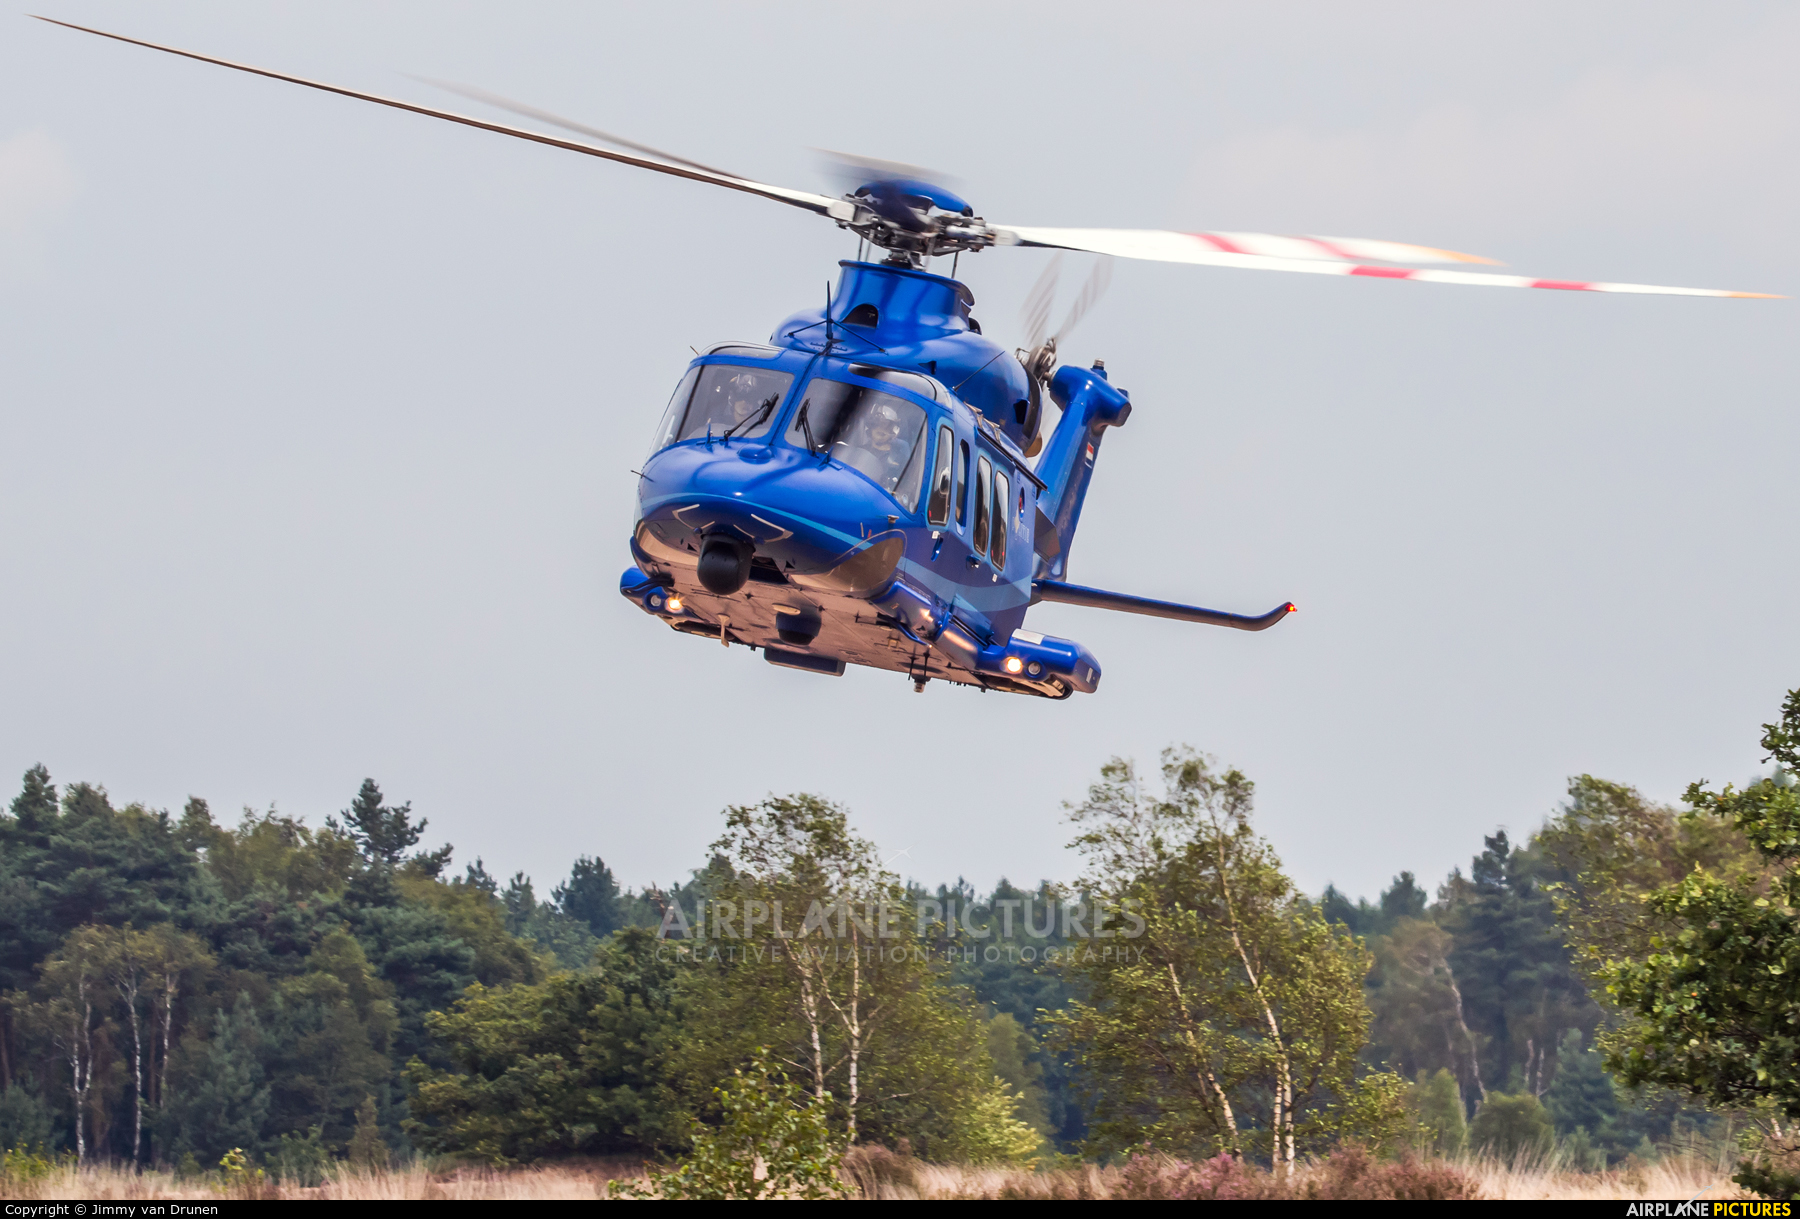 Netherlands - Police PH-PXY aircraft at GLV-5 Training area